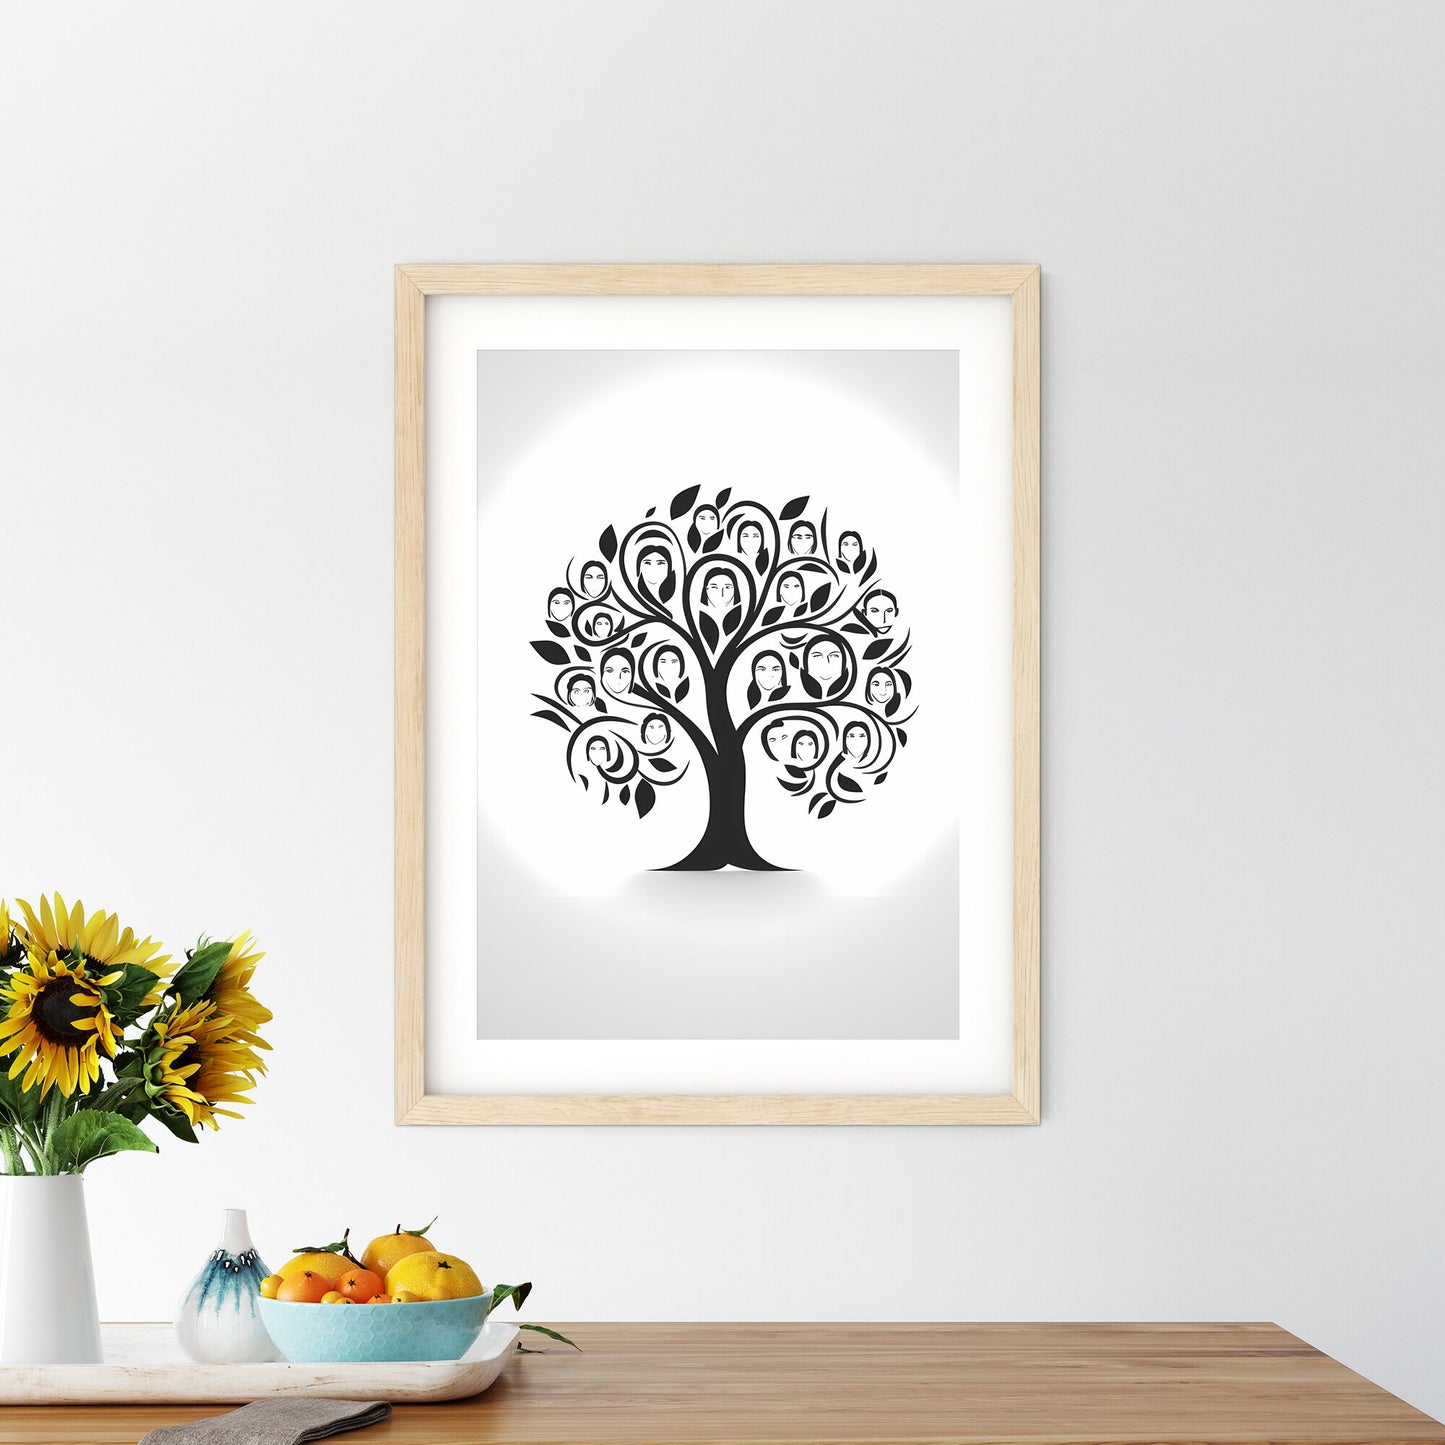 Black Tree With People Faces Art Print Default Title